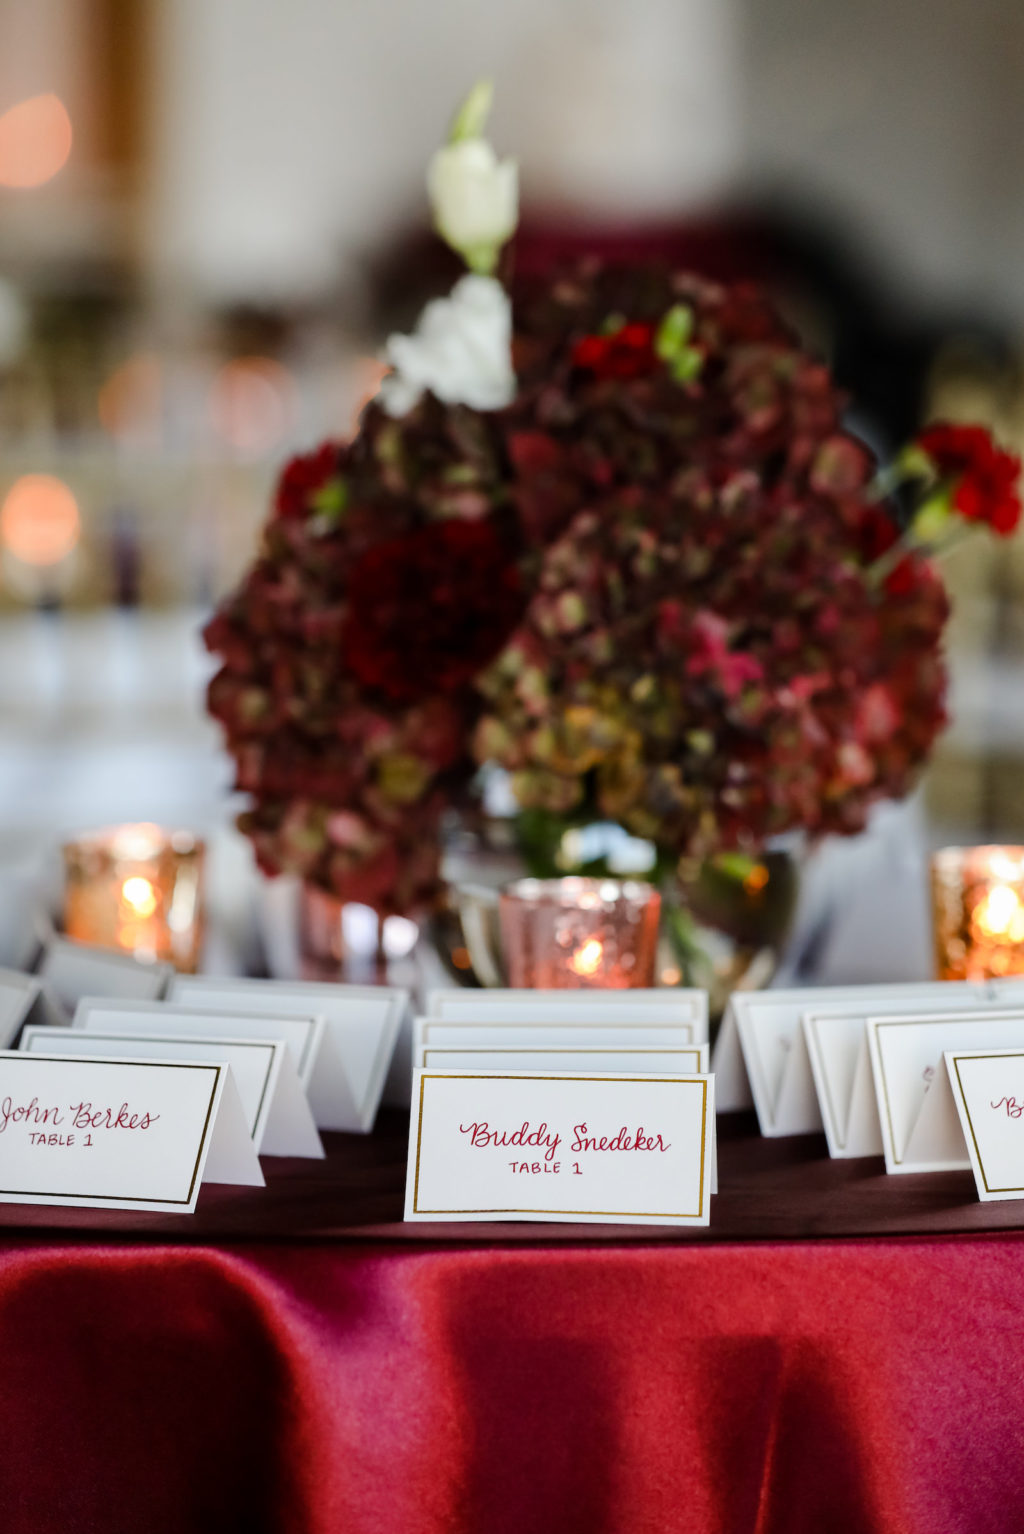 Tampa Wedding Escort Card Table with Burgundy Red Table Linen and Maroon Hydrangea Centerpiece